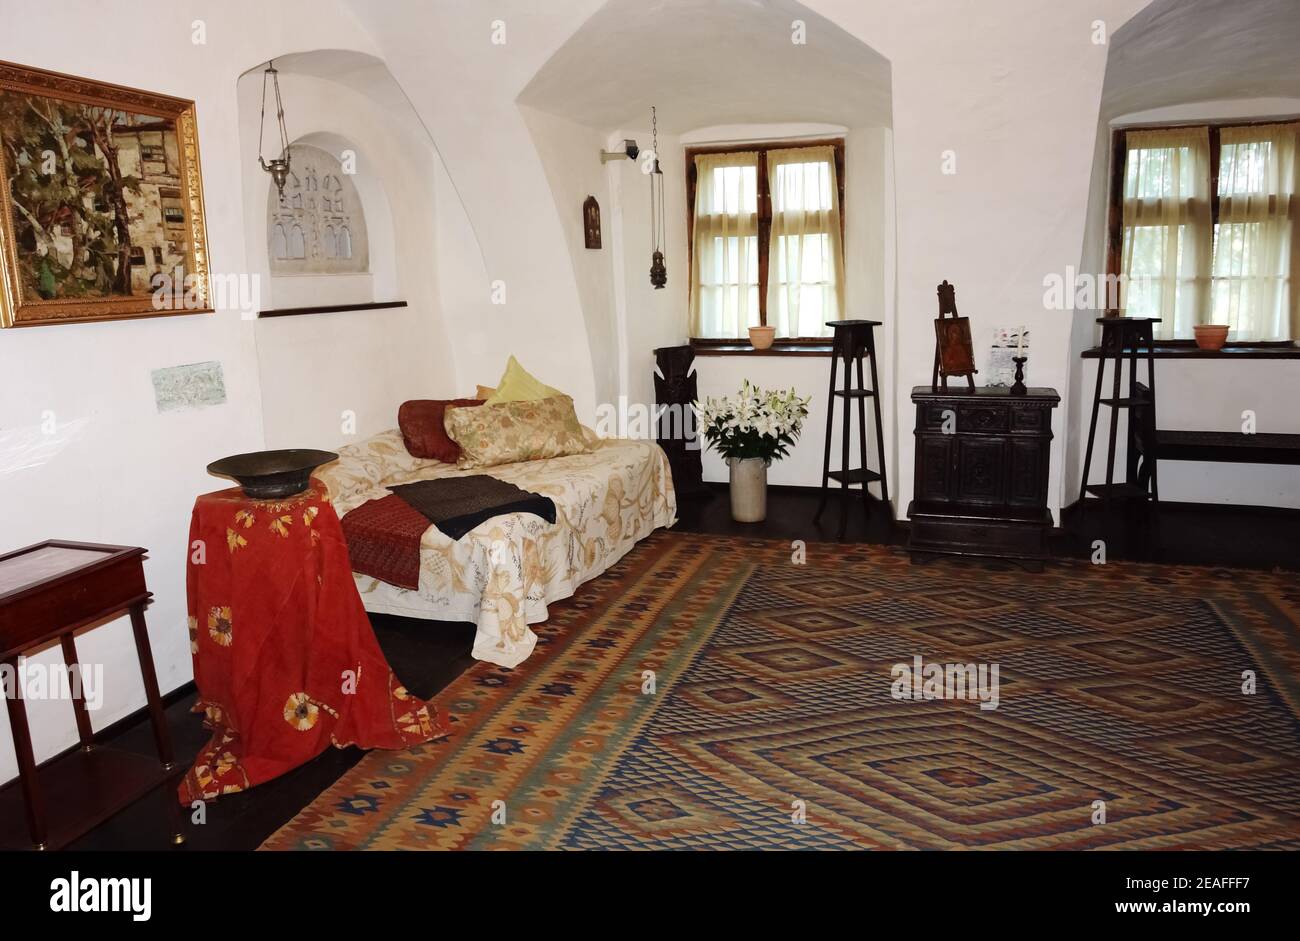 Interior of a room in an old castle with two windows, carved wooden furniture and a bed. Stock Photo